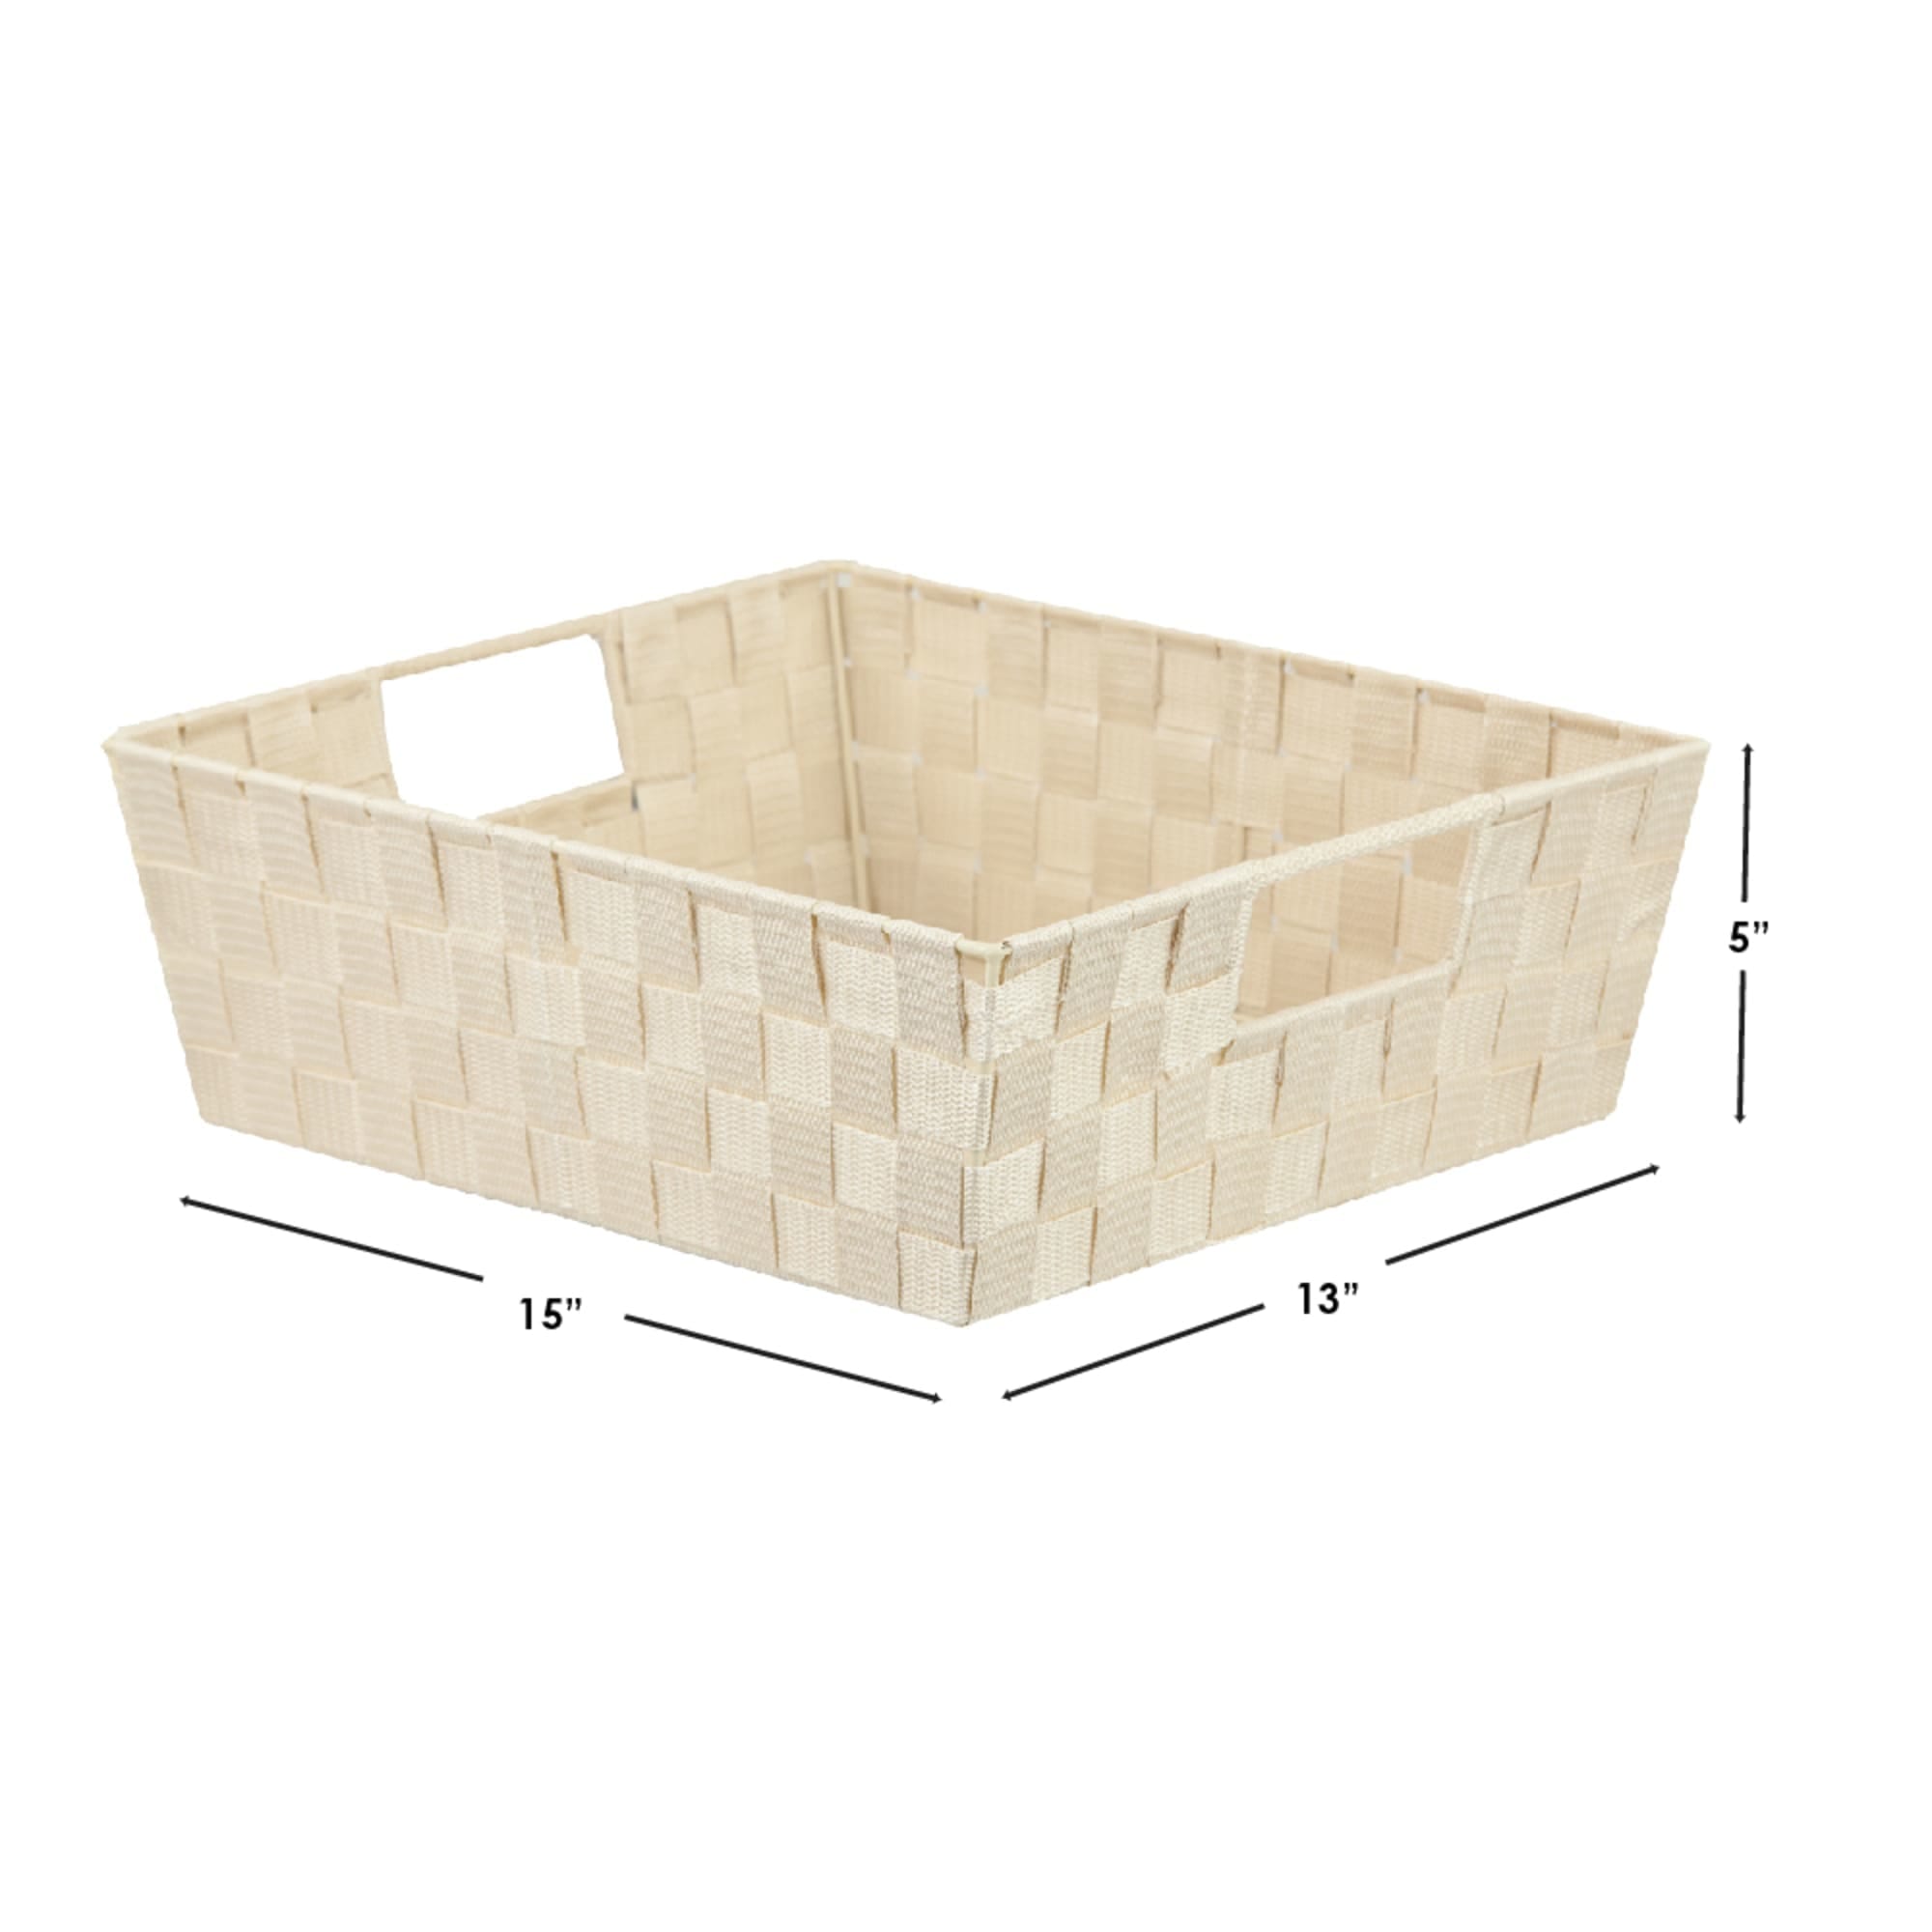 Home Basics Large Woven Strap Open Bin, Ivory $6.00 EACH, CASE PACK OF 6